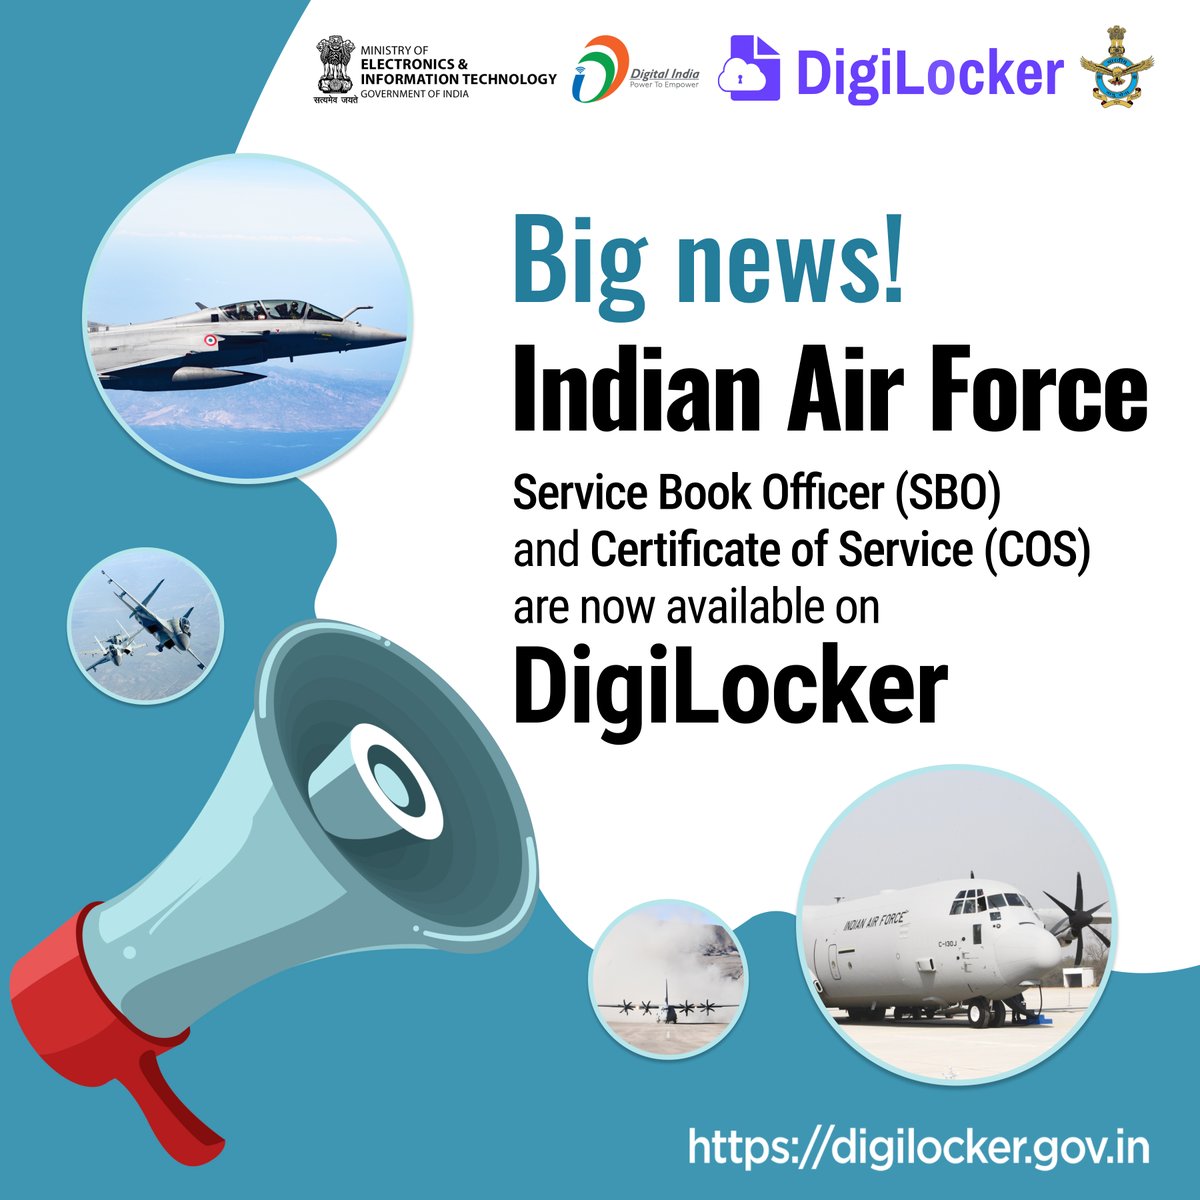 Big News! Indian Air Force, Service Book Officer (SBO) and Certificate of Service (COS) are now digitally accessible on #DigiLocker! Download App Now
digilocker.gov.in/installapp
#indianairforce #DigitalIndia @IAF_MCC